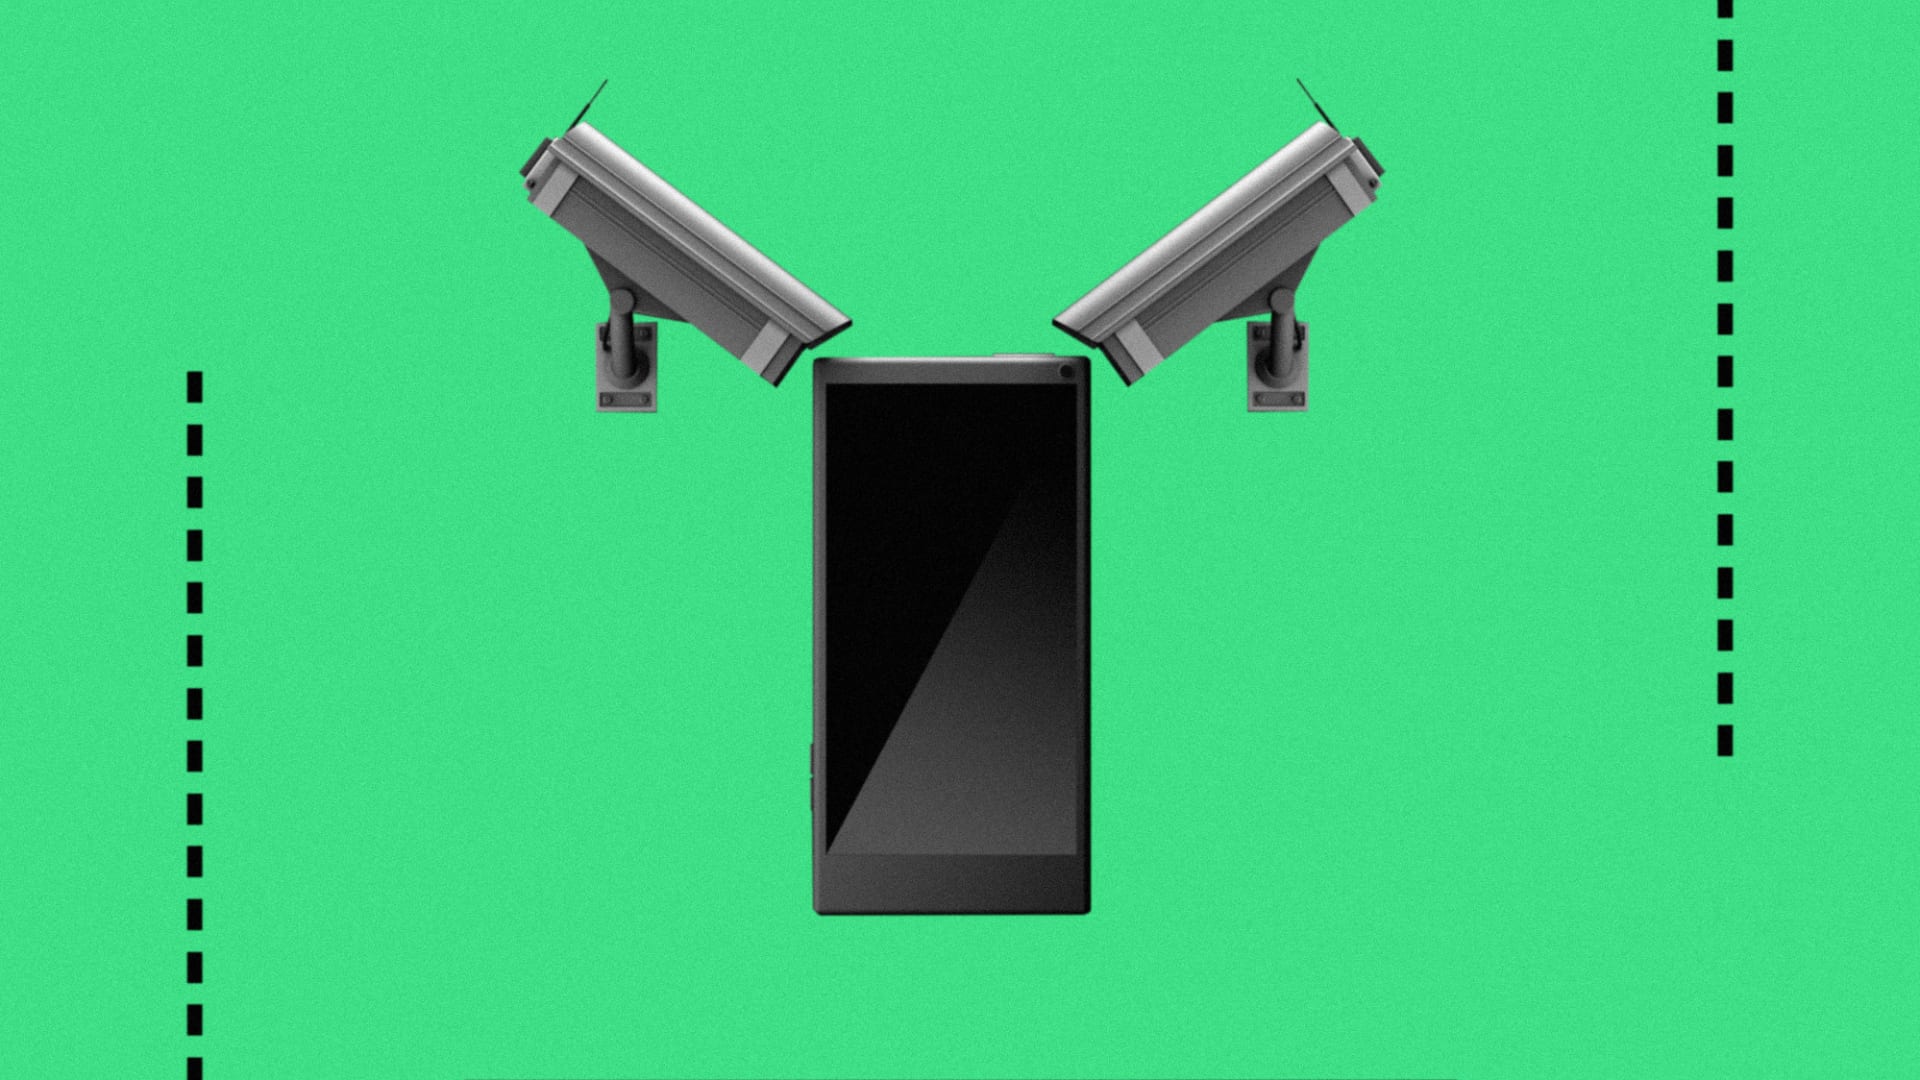 Android Phones Have a Major Flaw That Could Allow Them to Spy on You